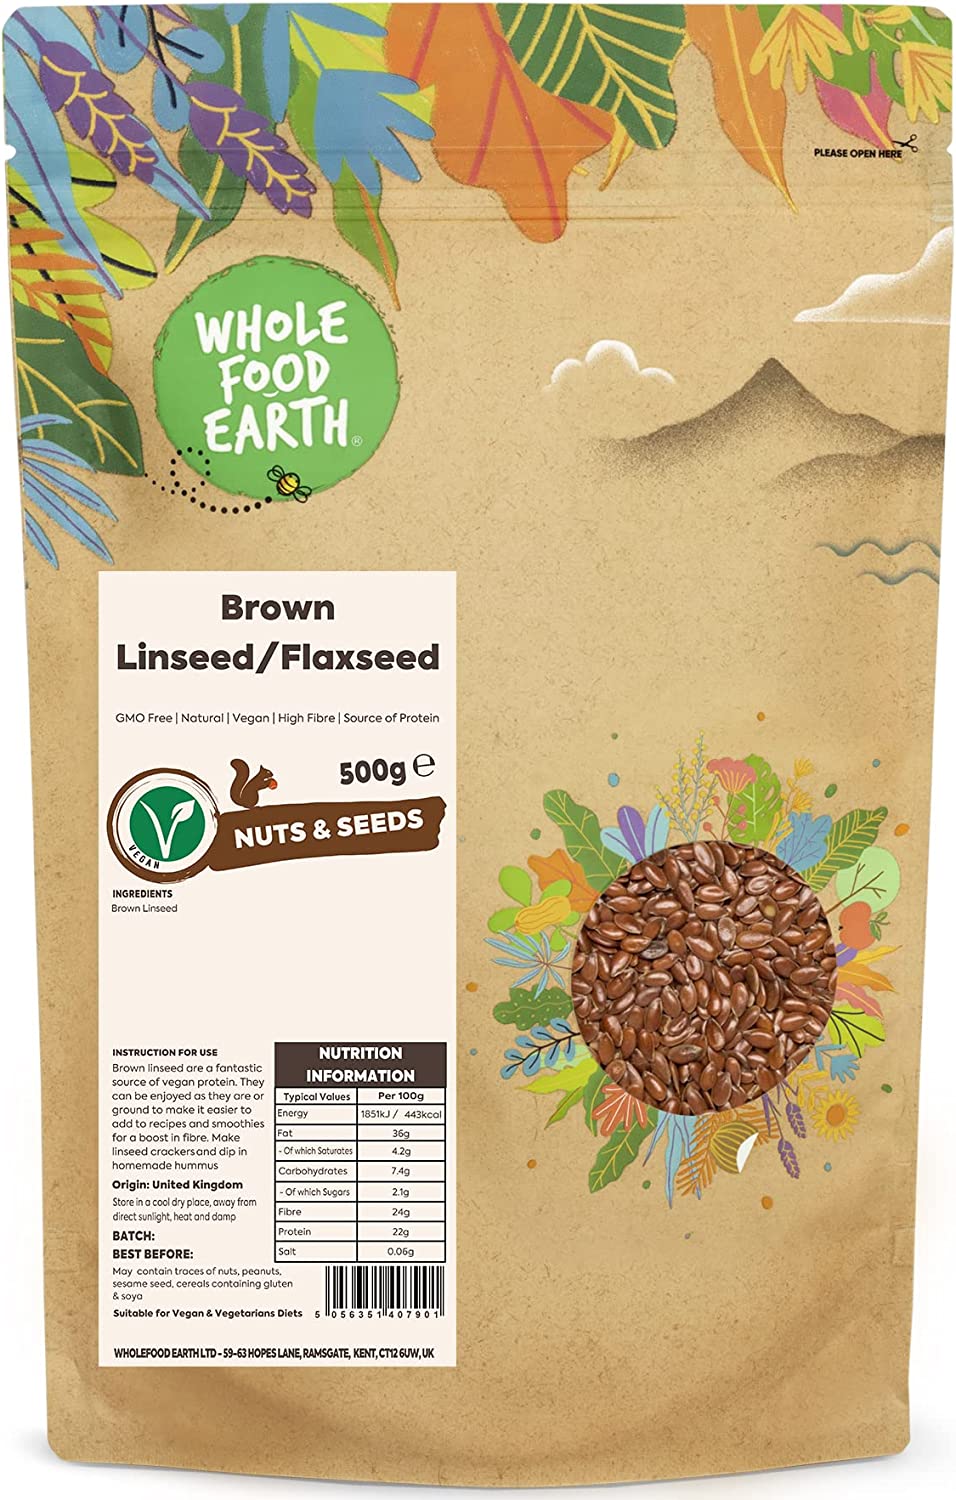 Wholefood Earth Brown Linseed/Flaxseed 500g (Nov 22) RRP £5.94 CLEARANCE XL £3.99